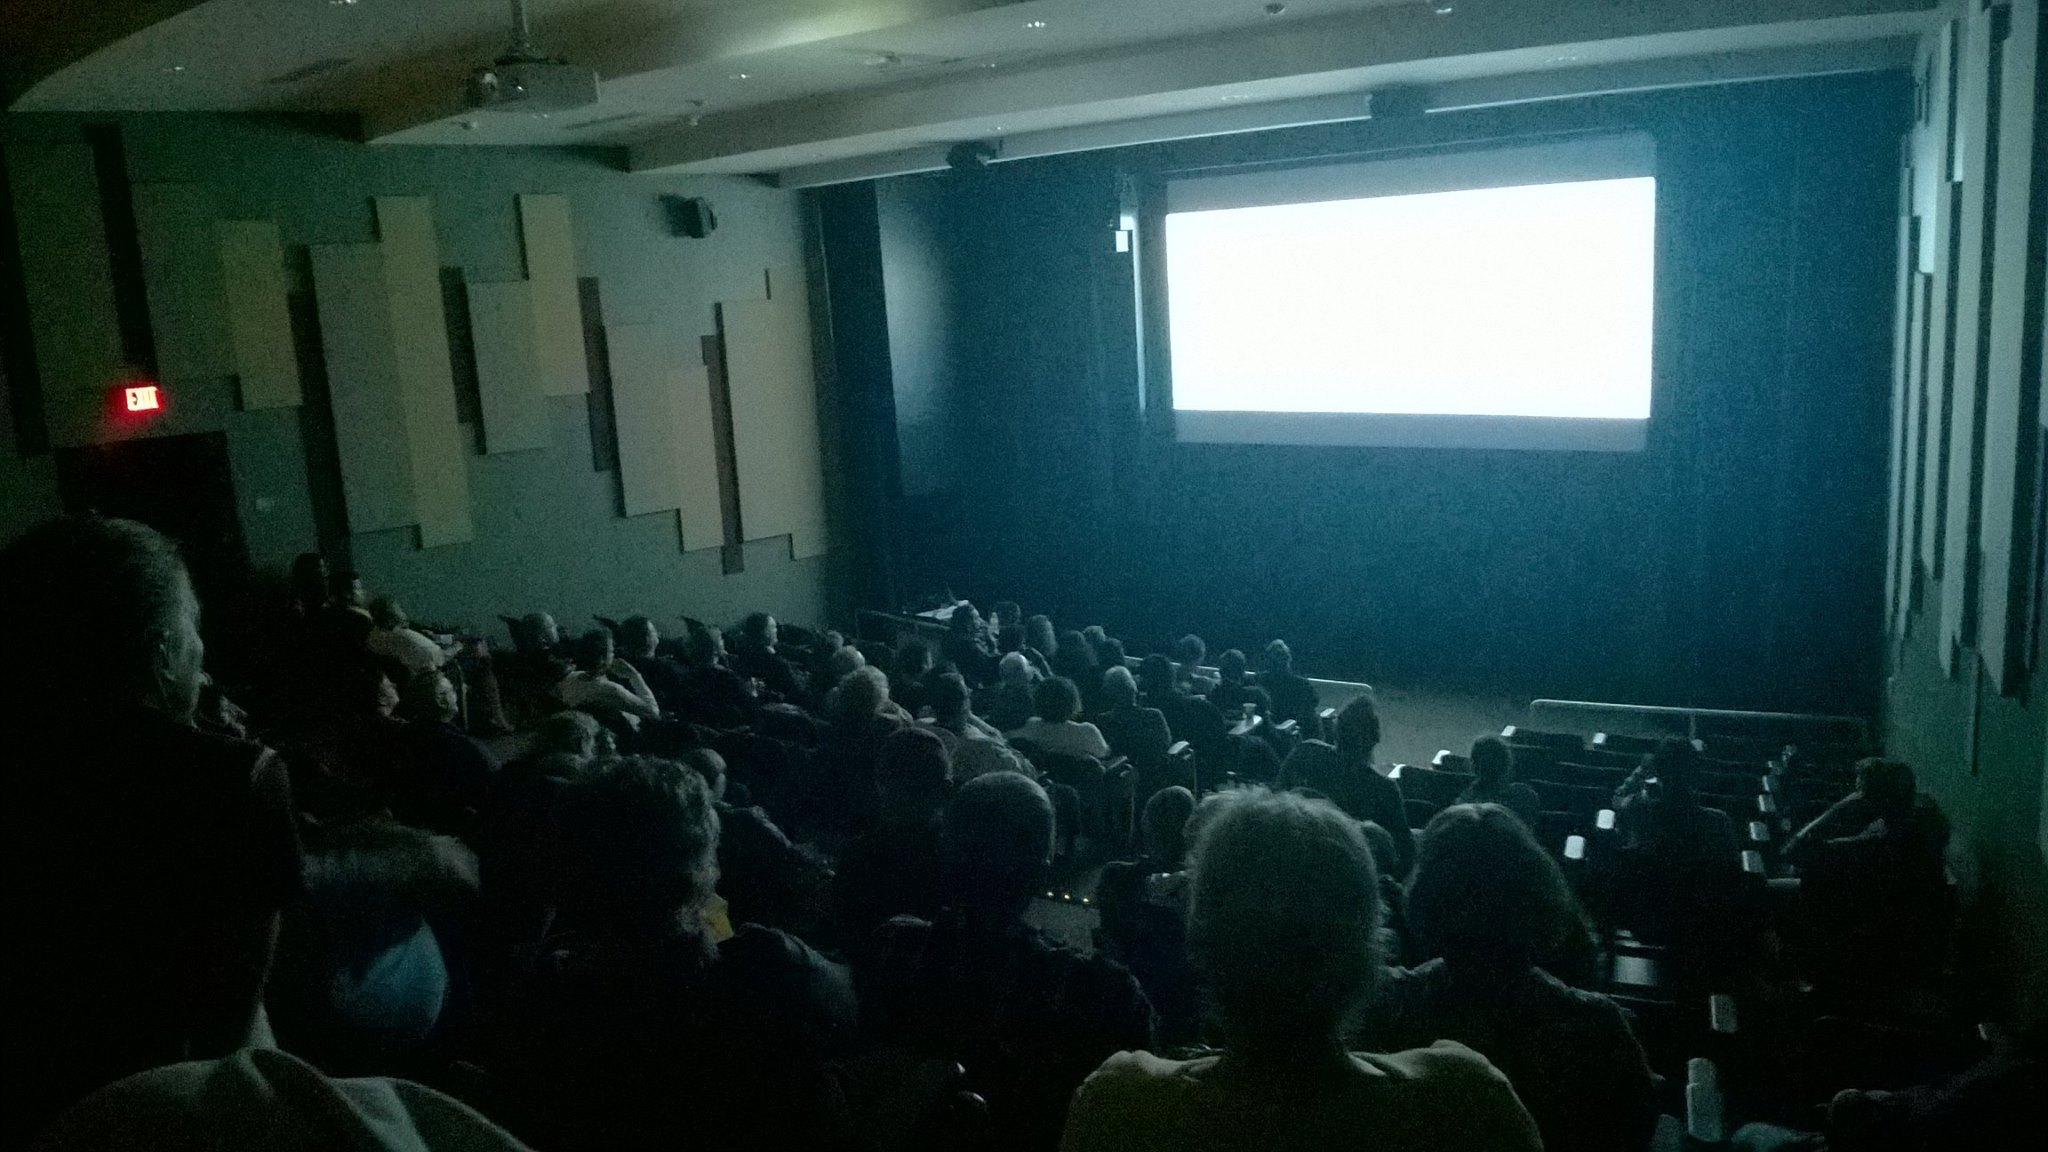 Full auditorium of people, sitting in the dark and watching a video on the projector screen onstage. 